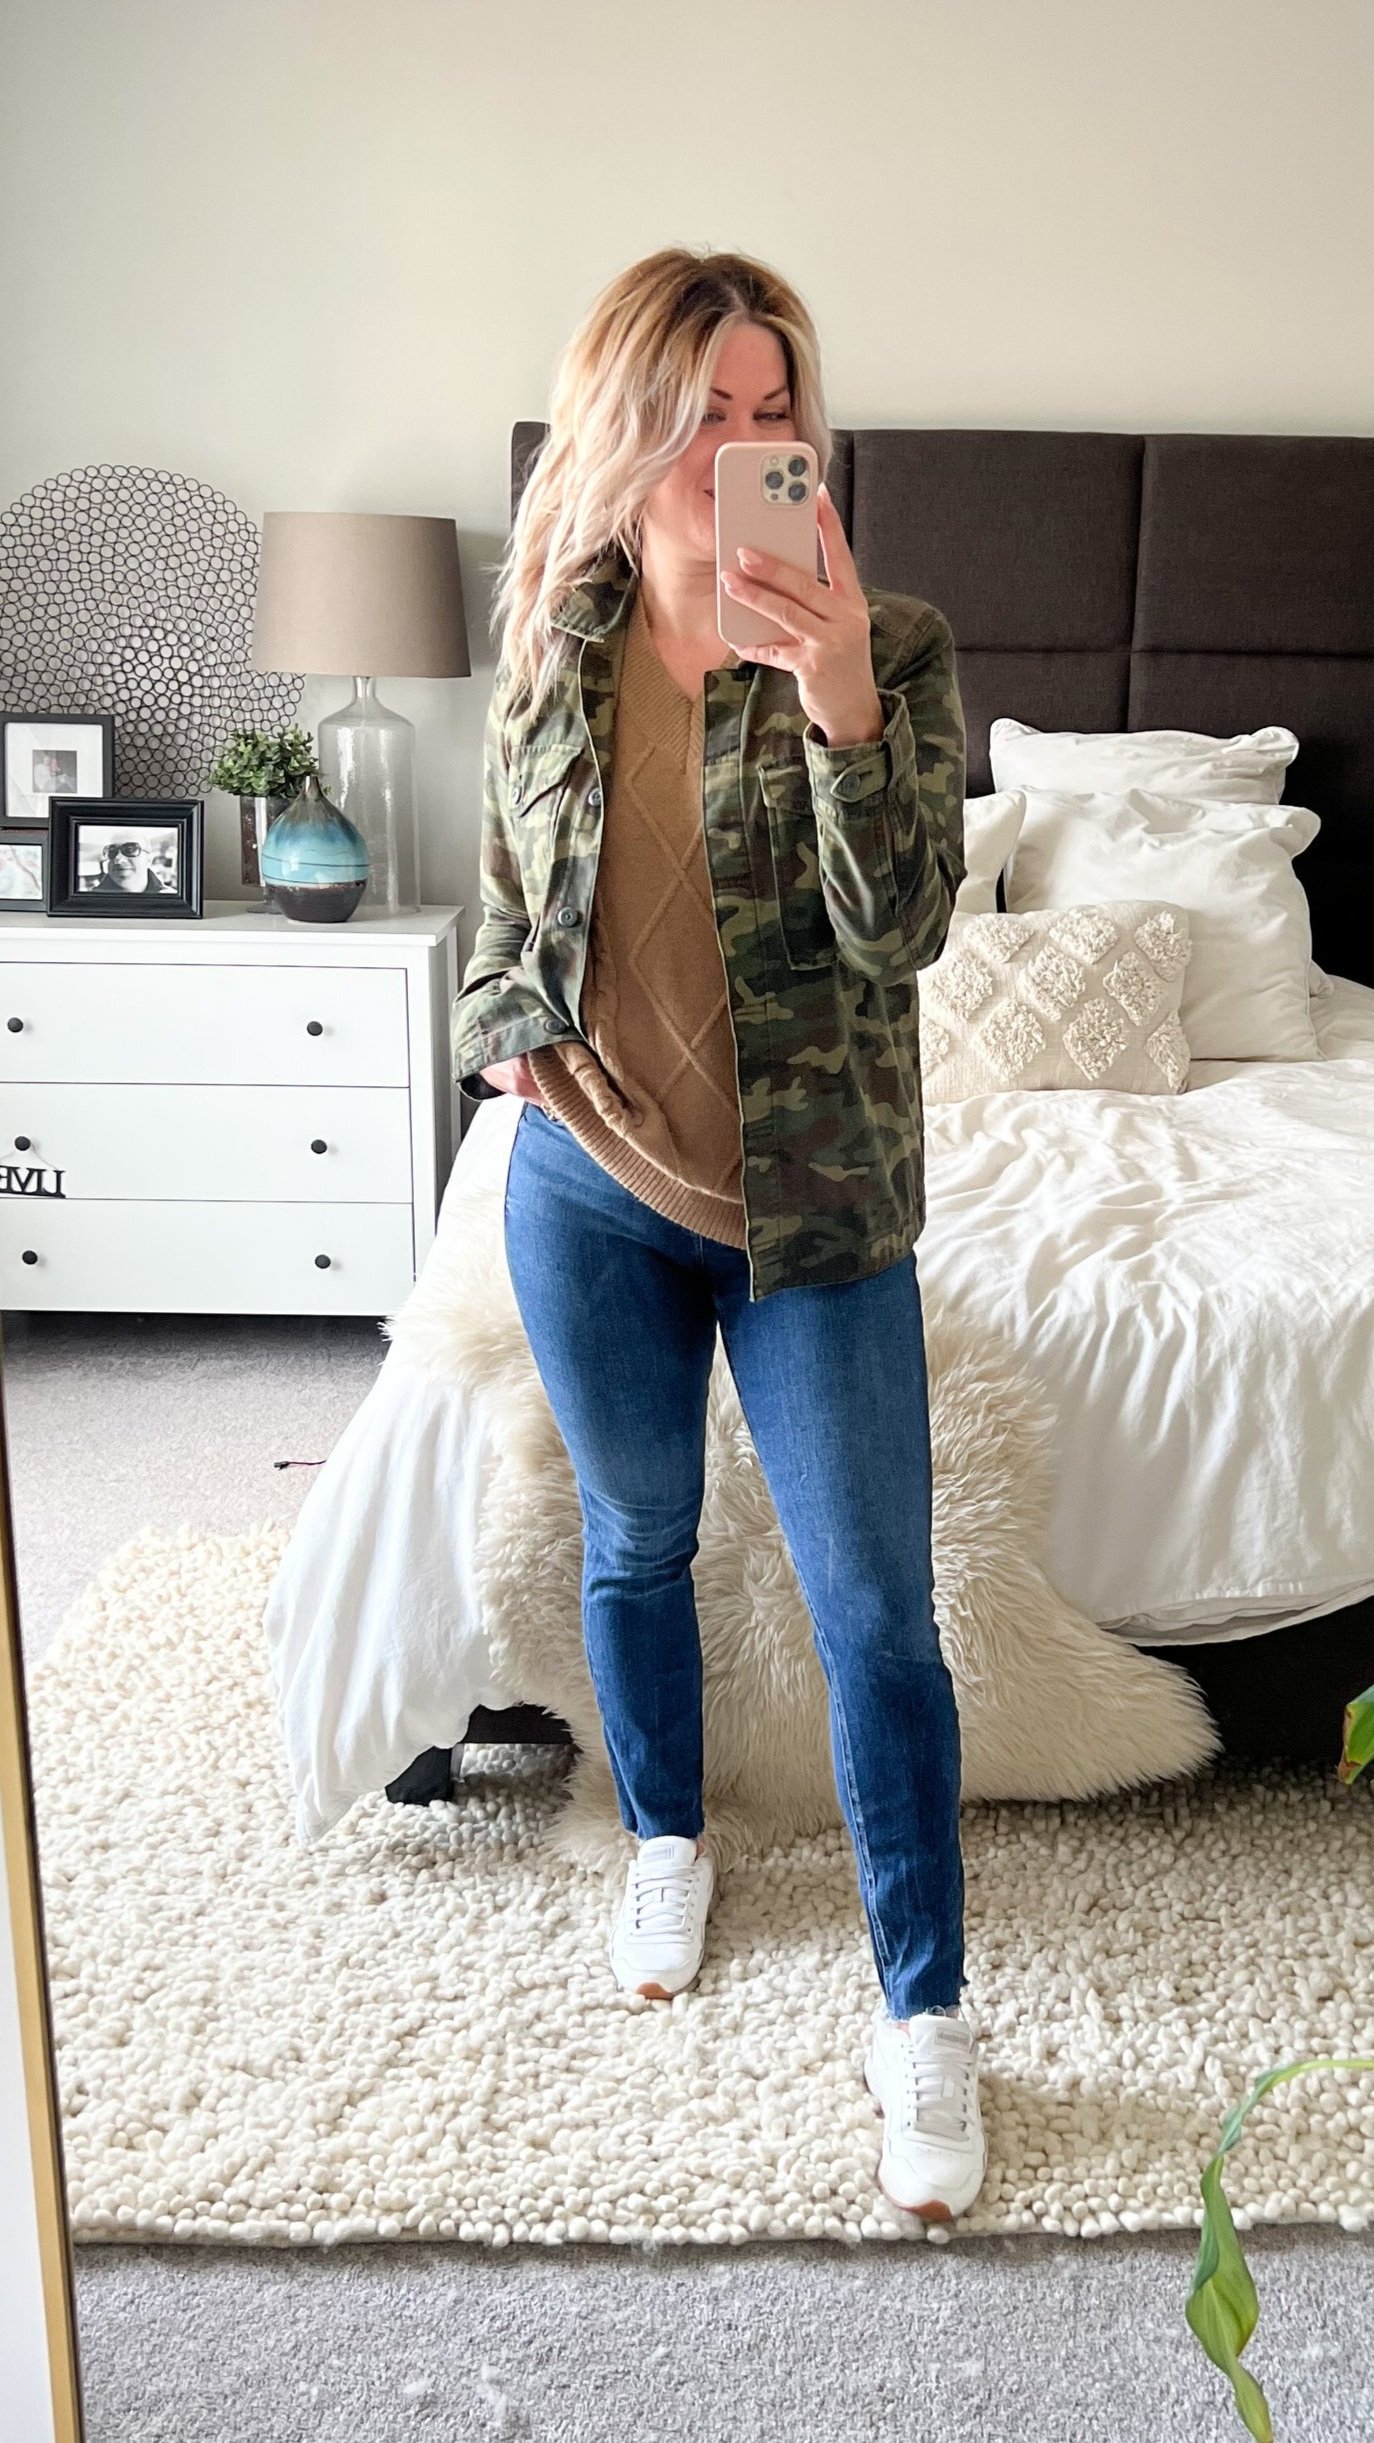 SKINNY JEANS + TAN CABLE KNIT VEST + CAMO JACKET + WHITE SNEAKERS  